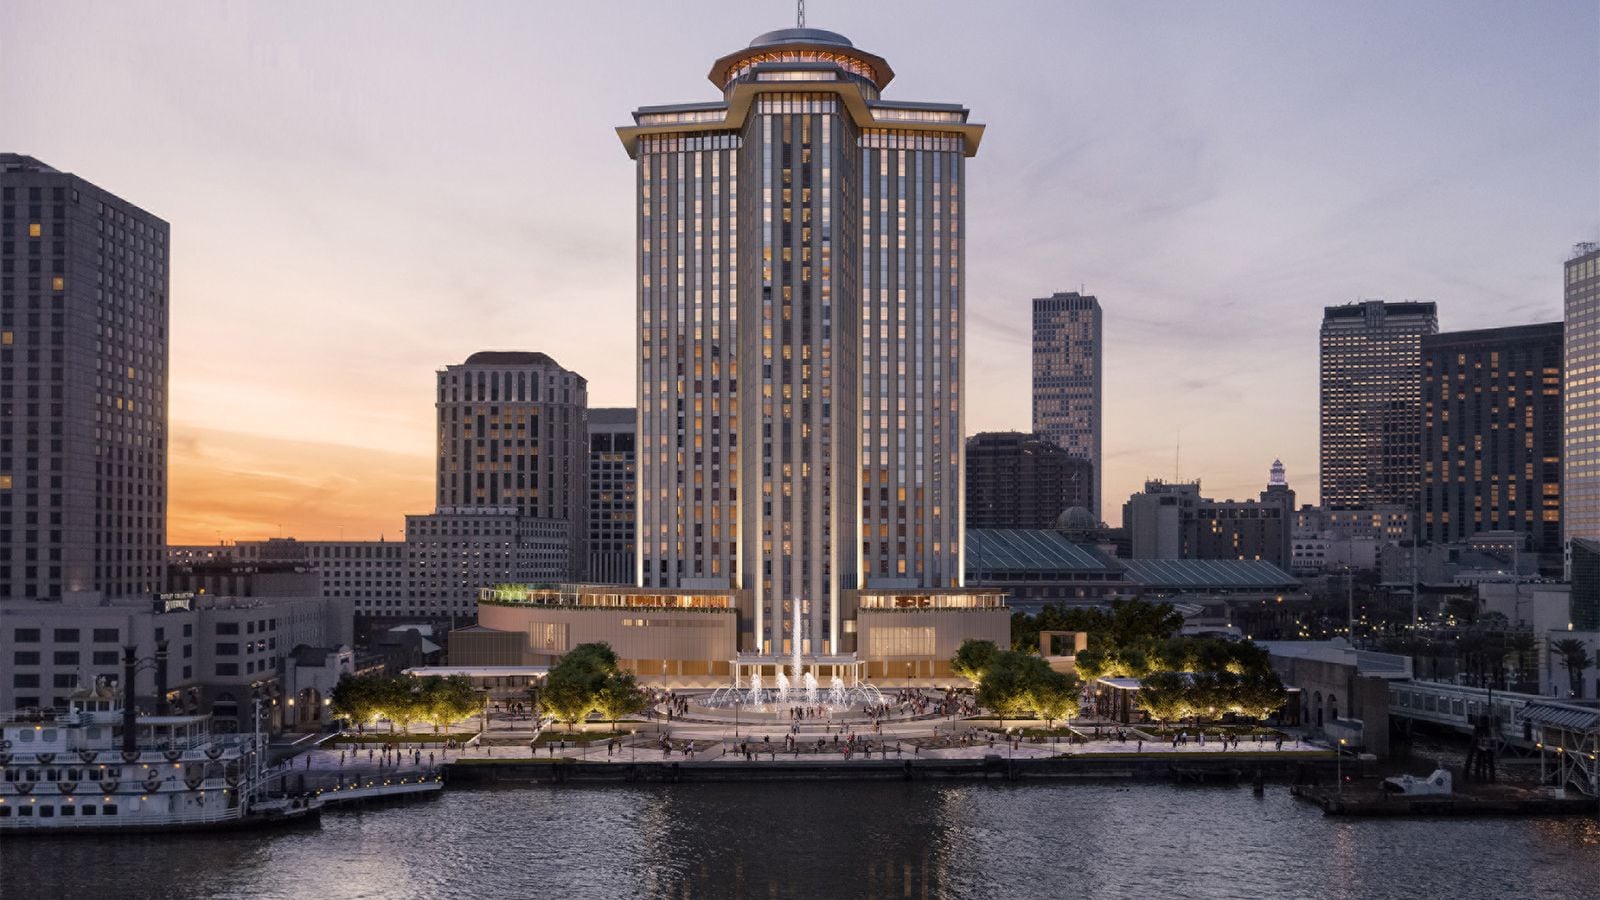 Developer Carpenter & Co. is also building the $530 million Four Seasons Hotel and condominium project on the river in downtown New Orleans.